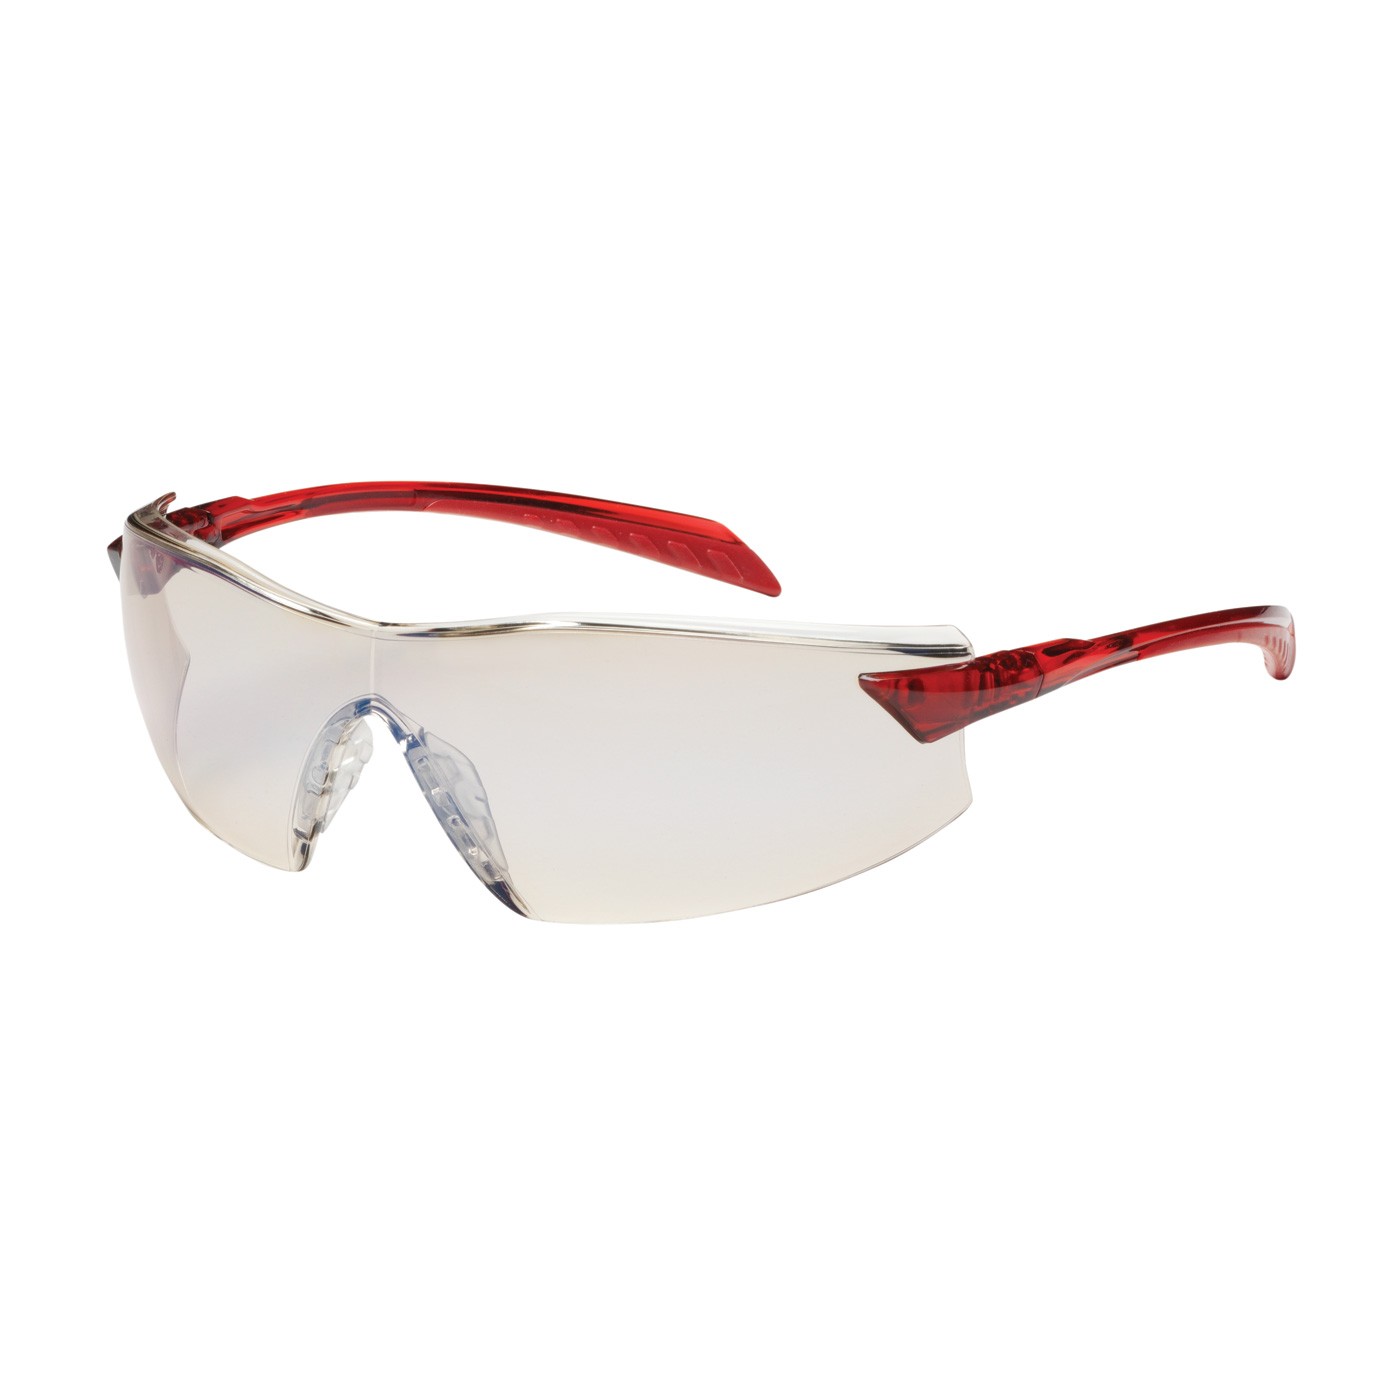 Radar™ Rimless Safety Glasses with Red Temple, I/O Blue Lens and Anti-Scratch / Anti-Fog Coating  (#250-45-1226)